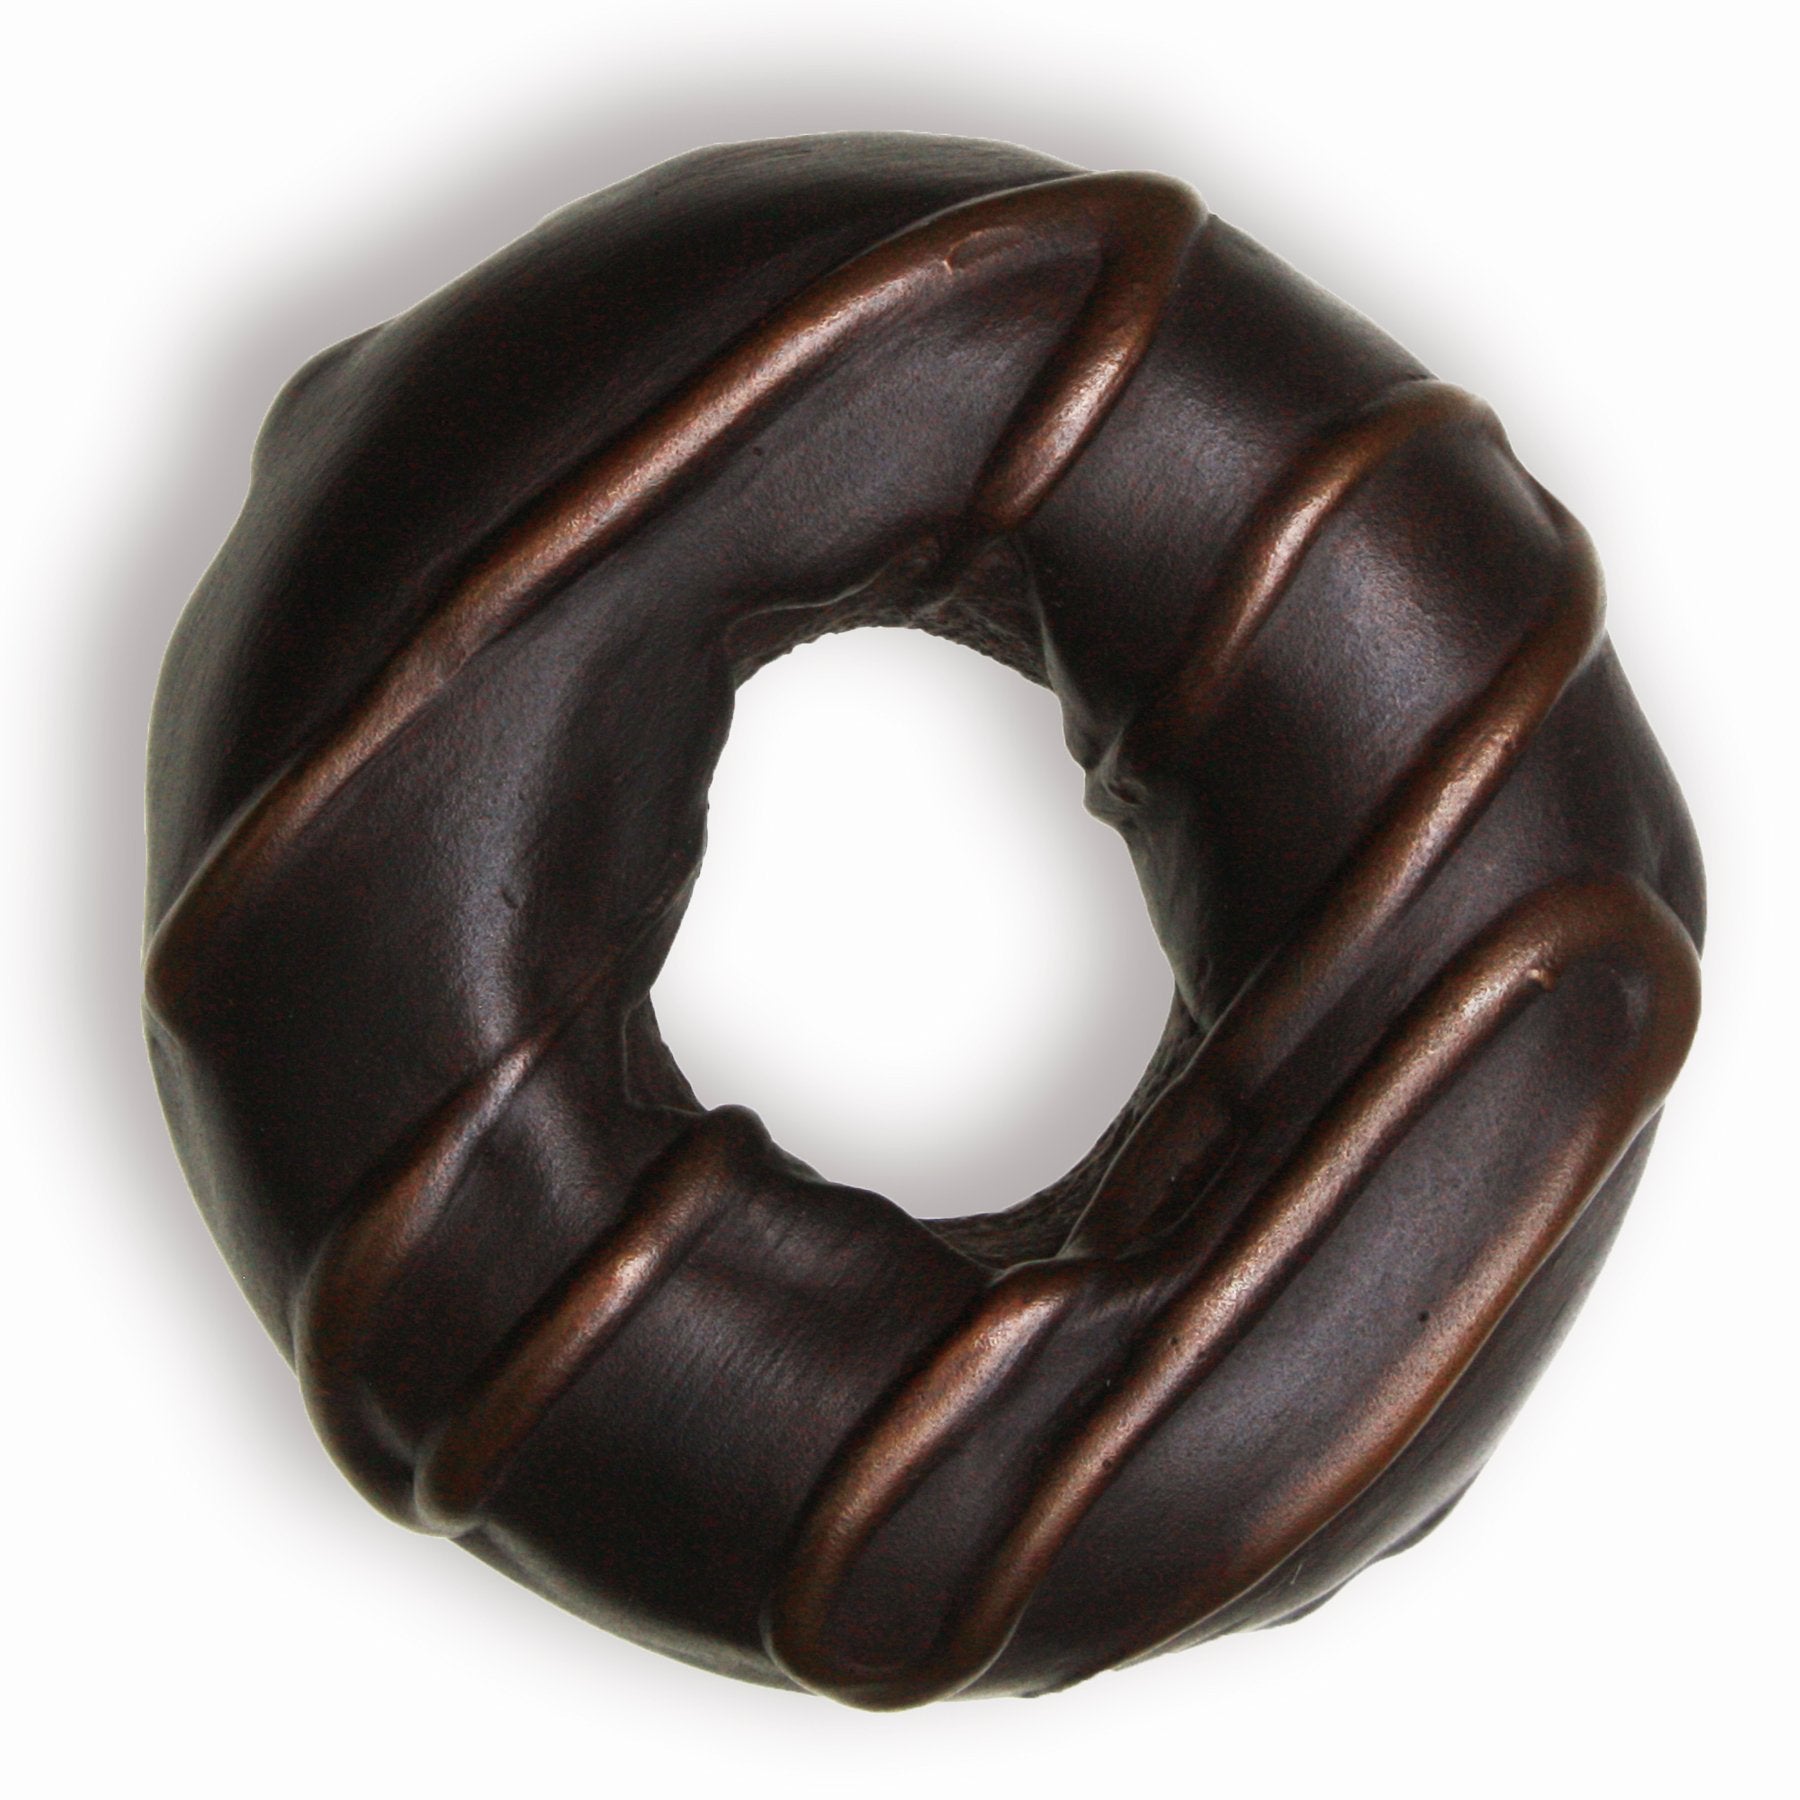 Life size Solid Cast Bronze Donut paperweights with exquisite detail are both sculptural and functional. Hand patinated in two versions: sprinkled or icing.